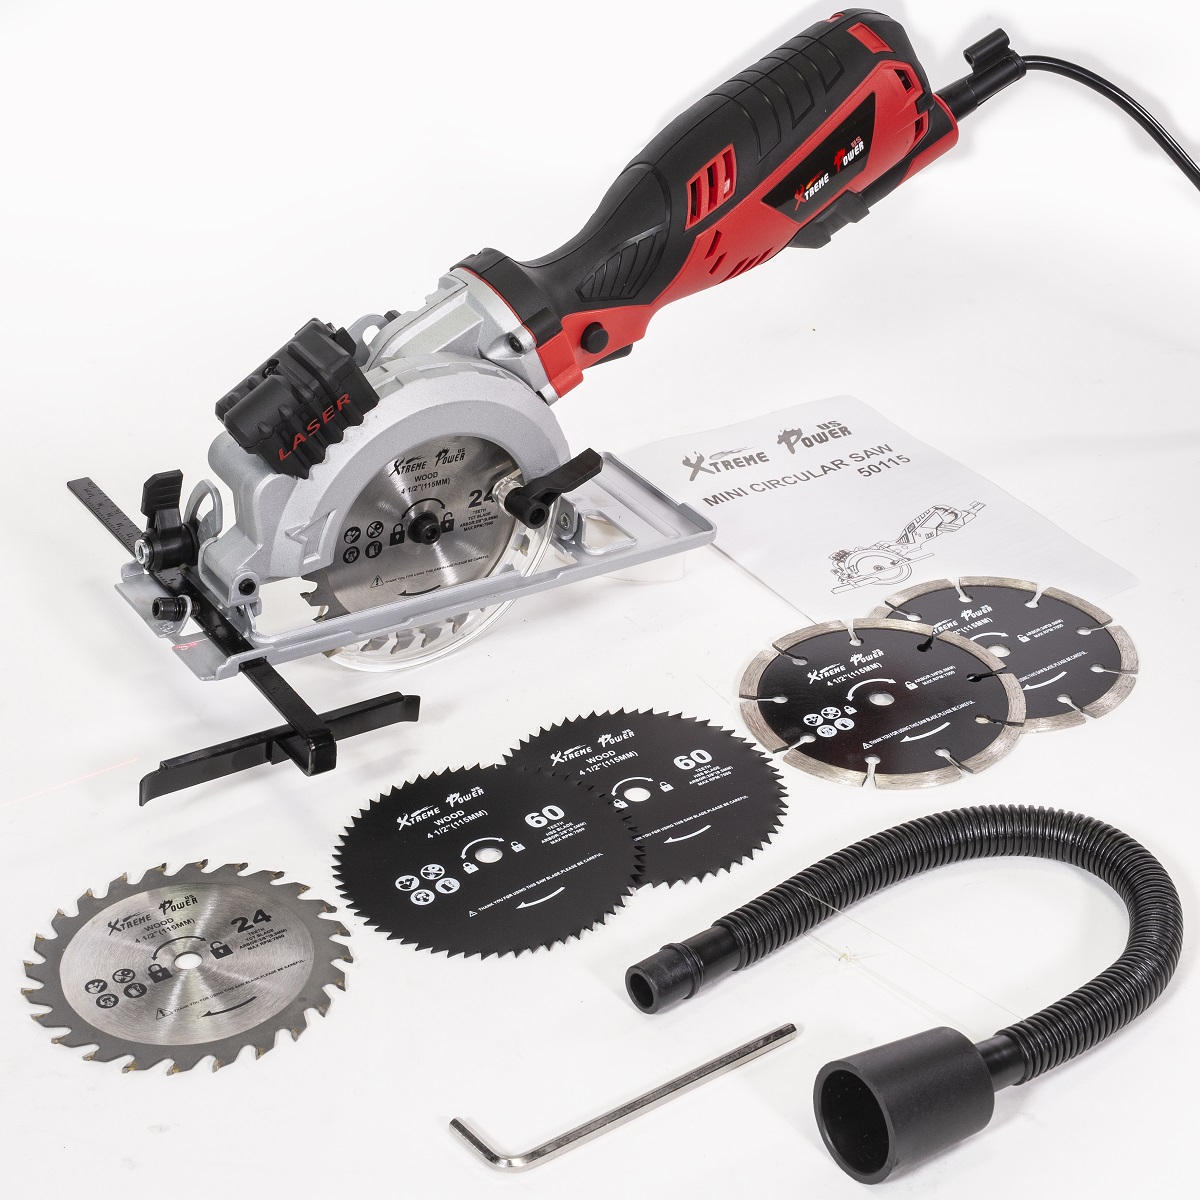 XtremepowerUS Electric Laser Guide Circular Saw with 6 Saw Blade (4-1/2") 3,500RPM - image 1 of 6